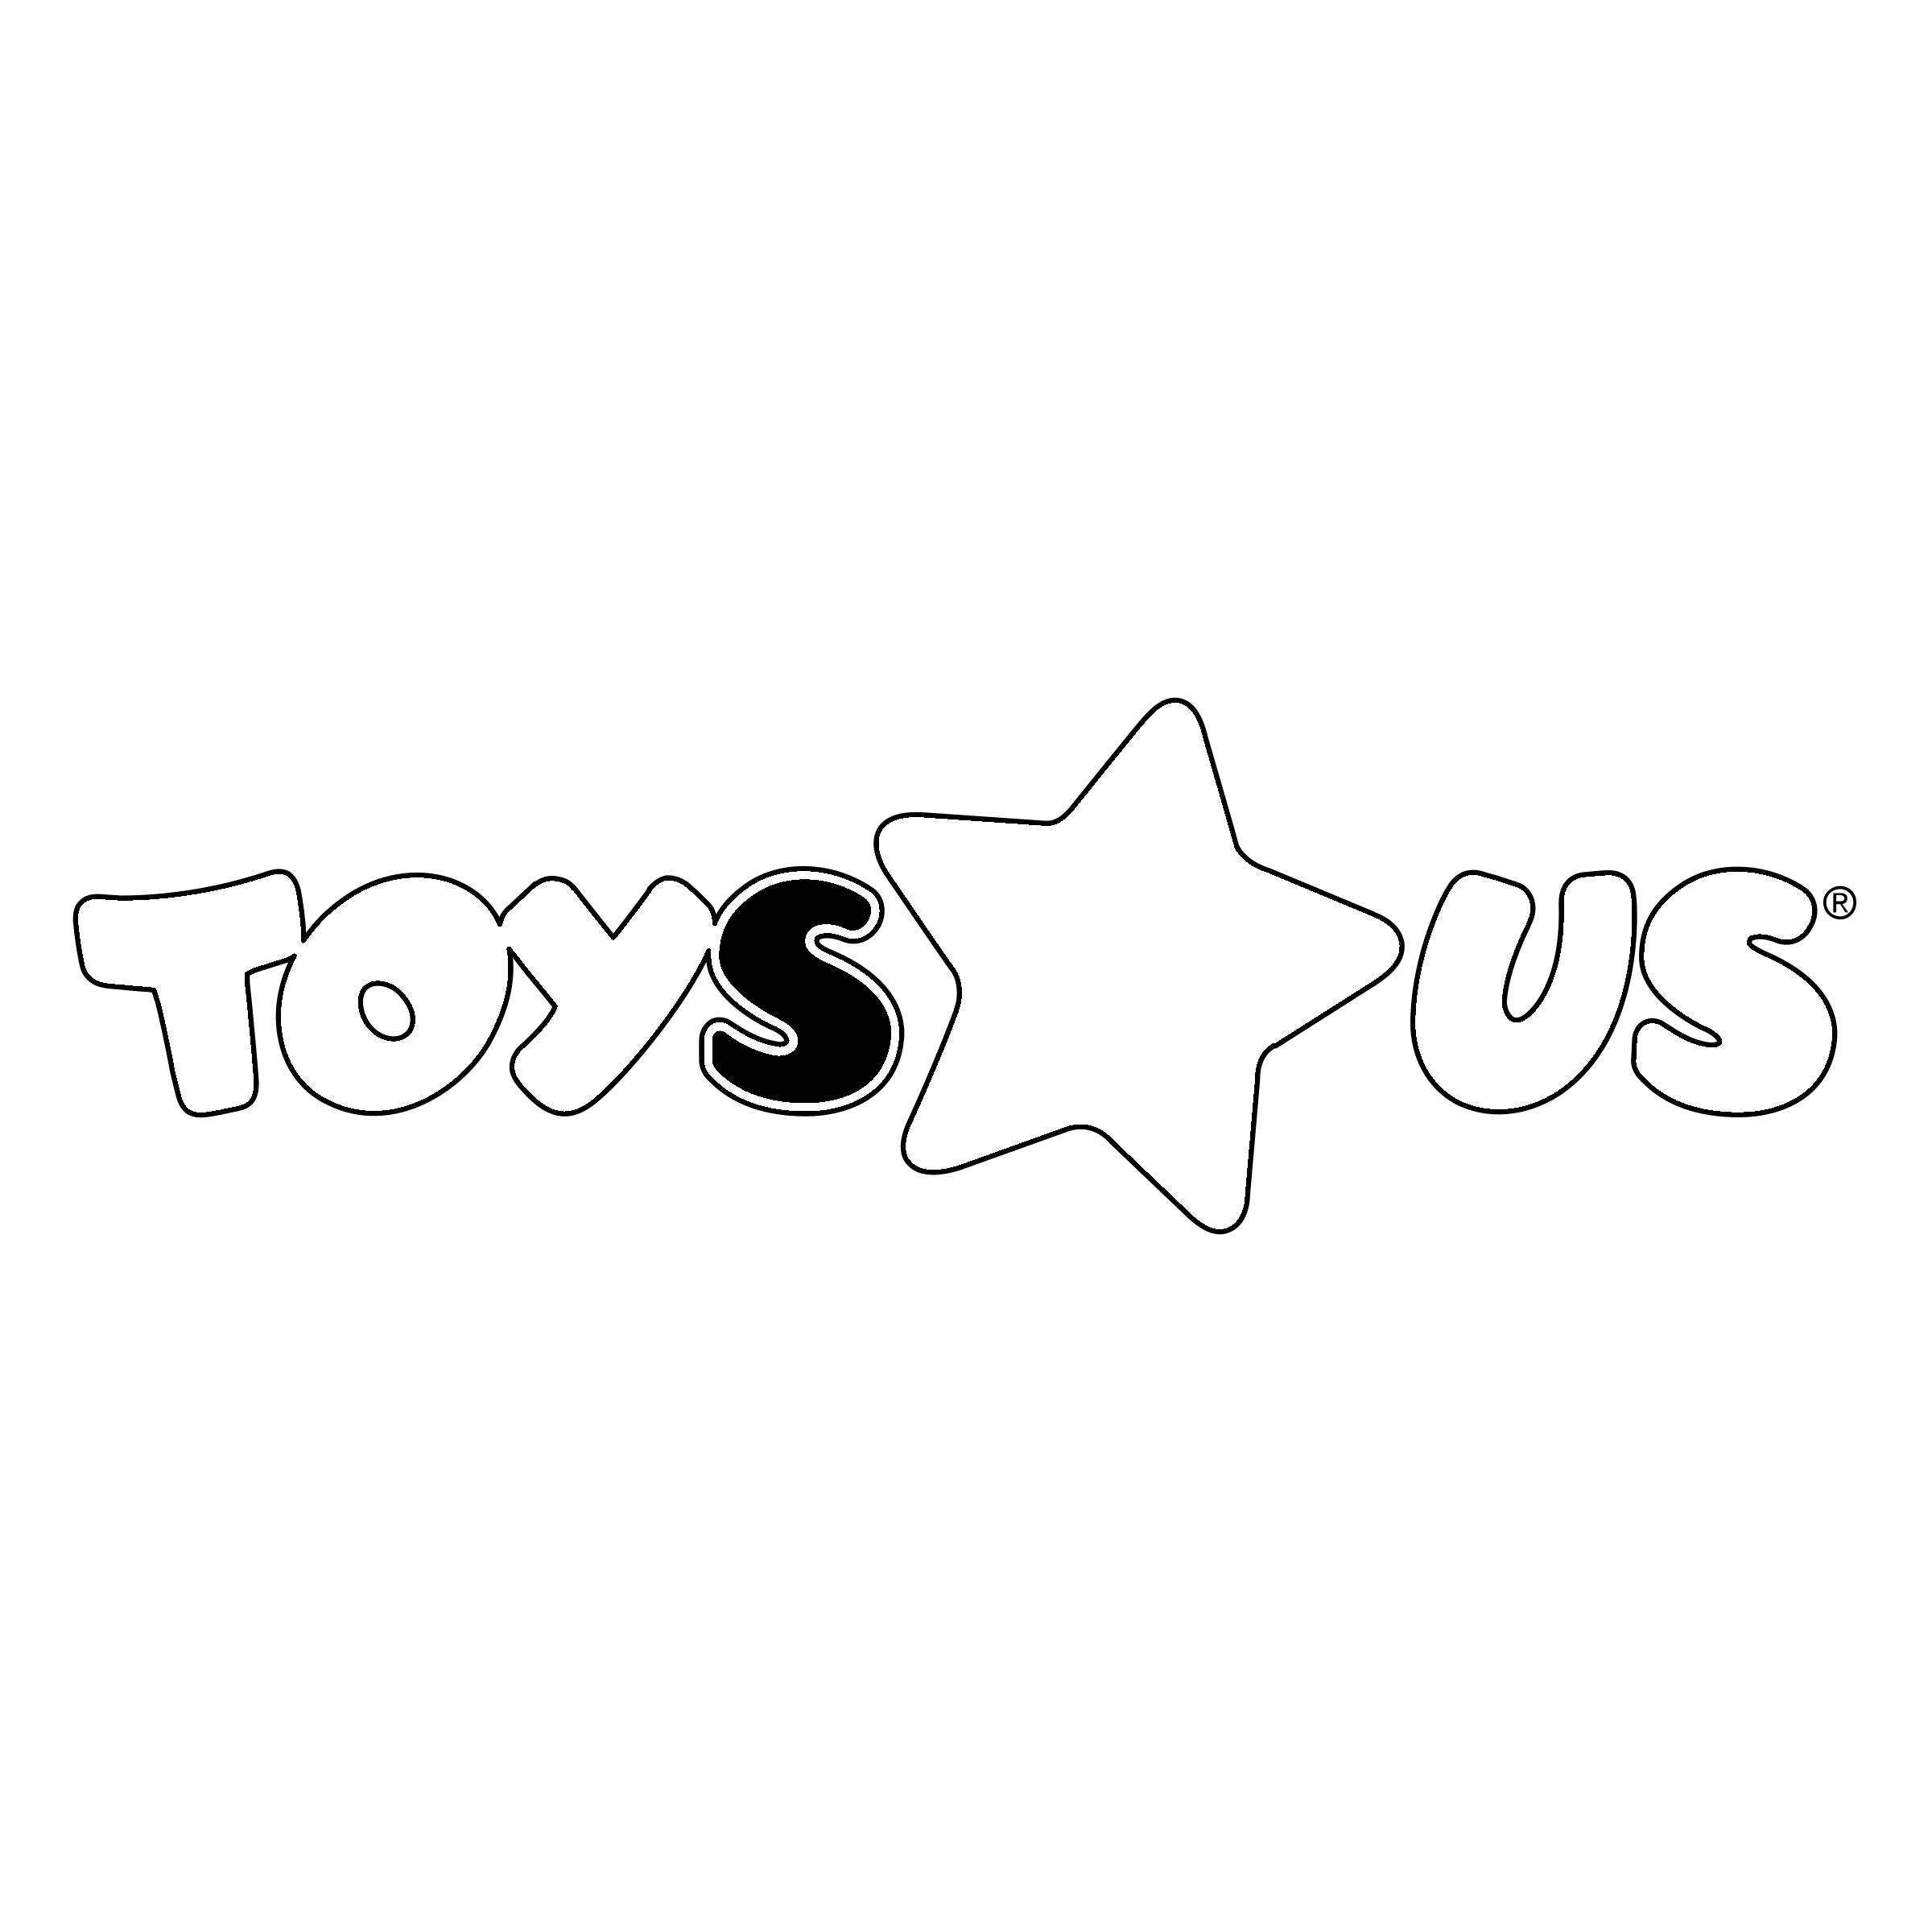 Toys Are Us Logo - Toys R Us Logo PNG Transparent & SVG Vector - Freebie Supply